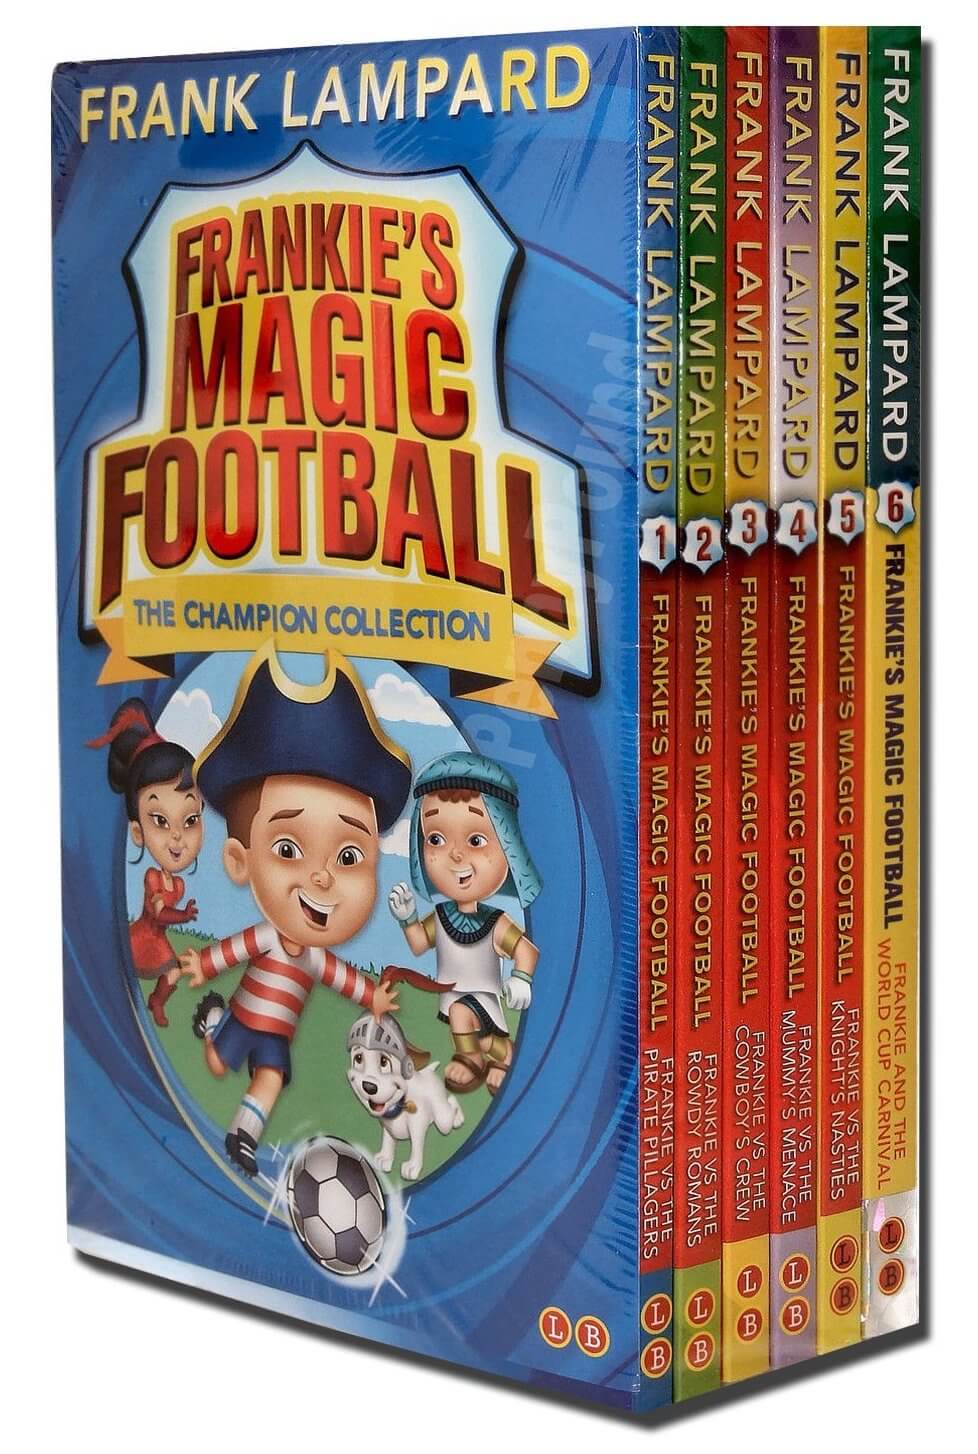 Frankies Magic Football Series 1- 6 Books Collection Set by Frank Lampard - best football books for kids